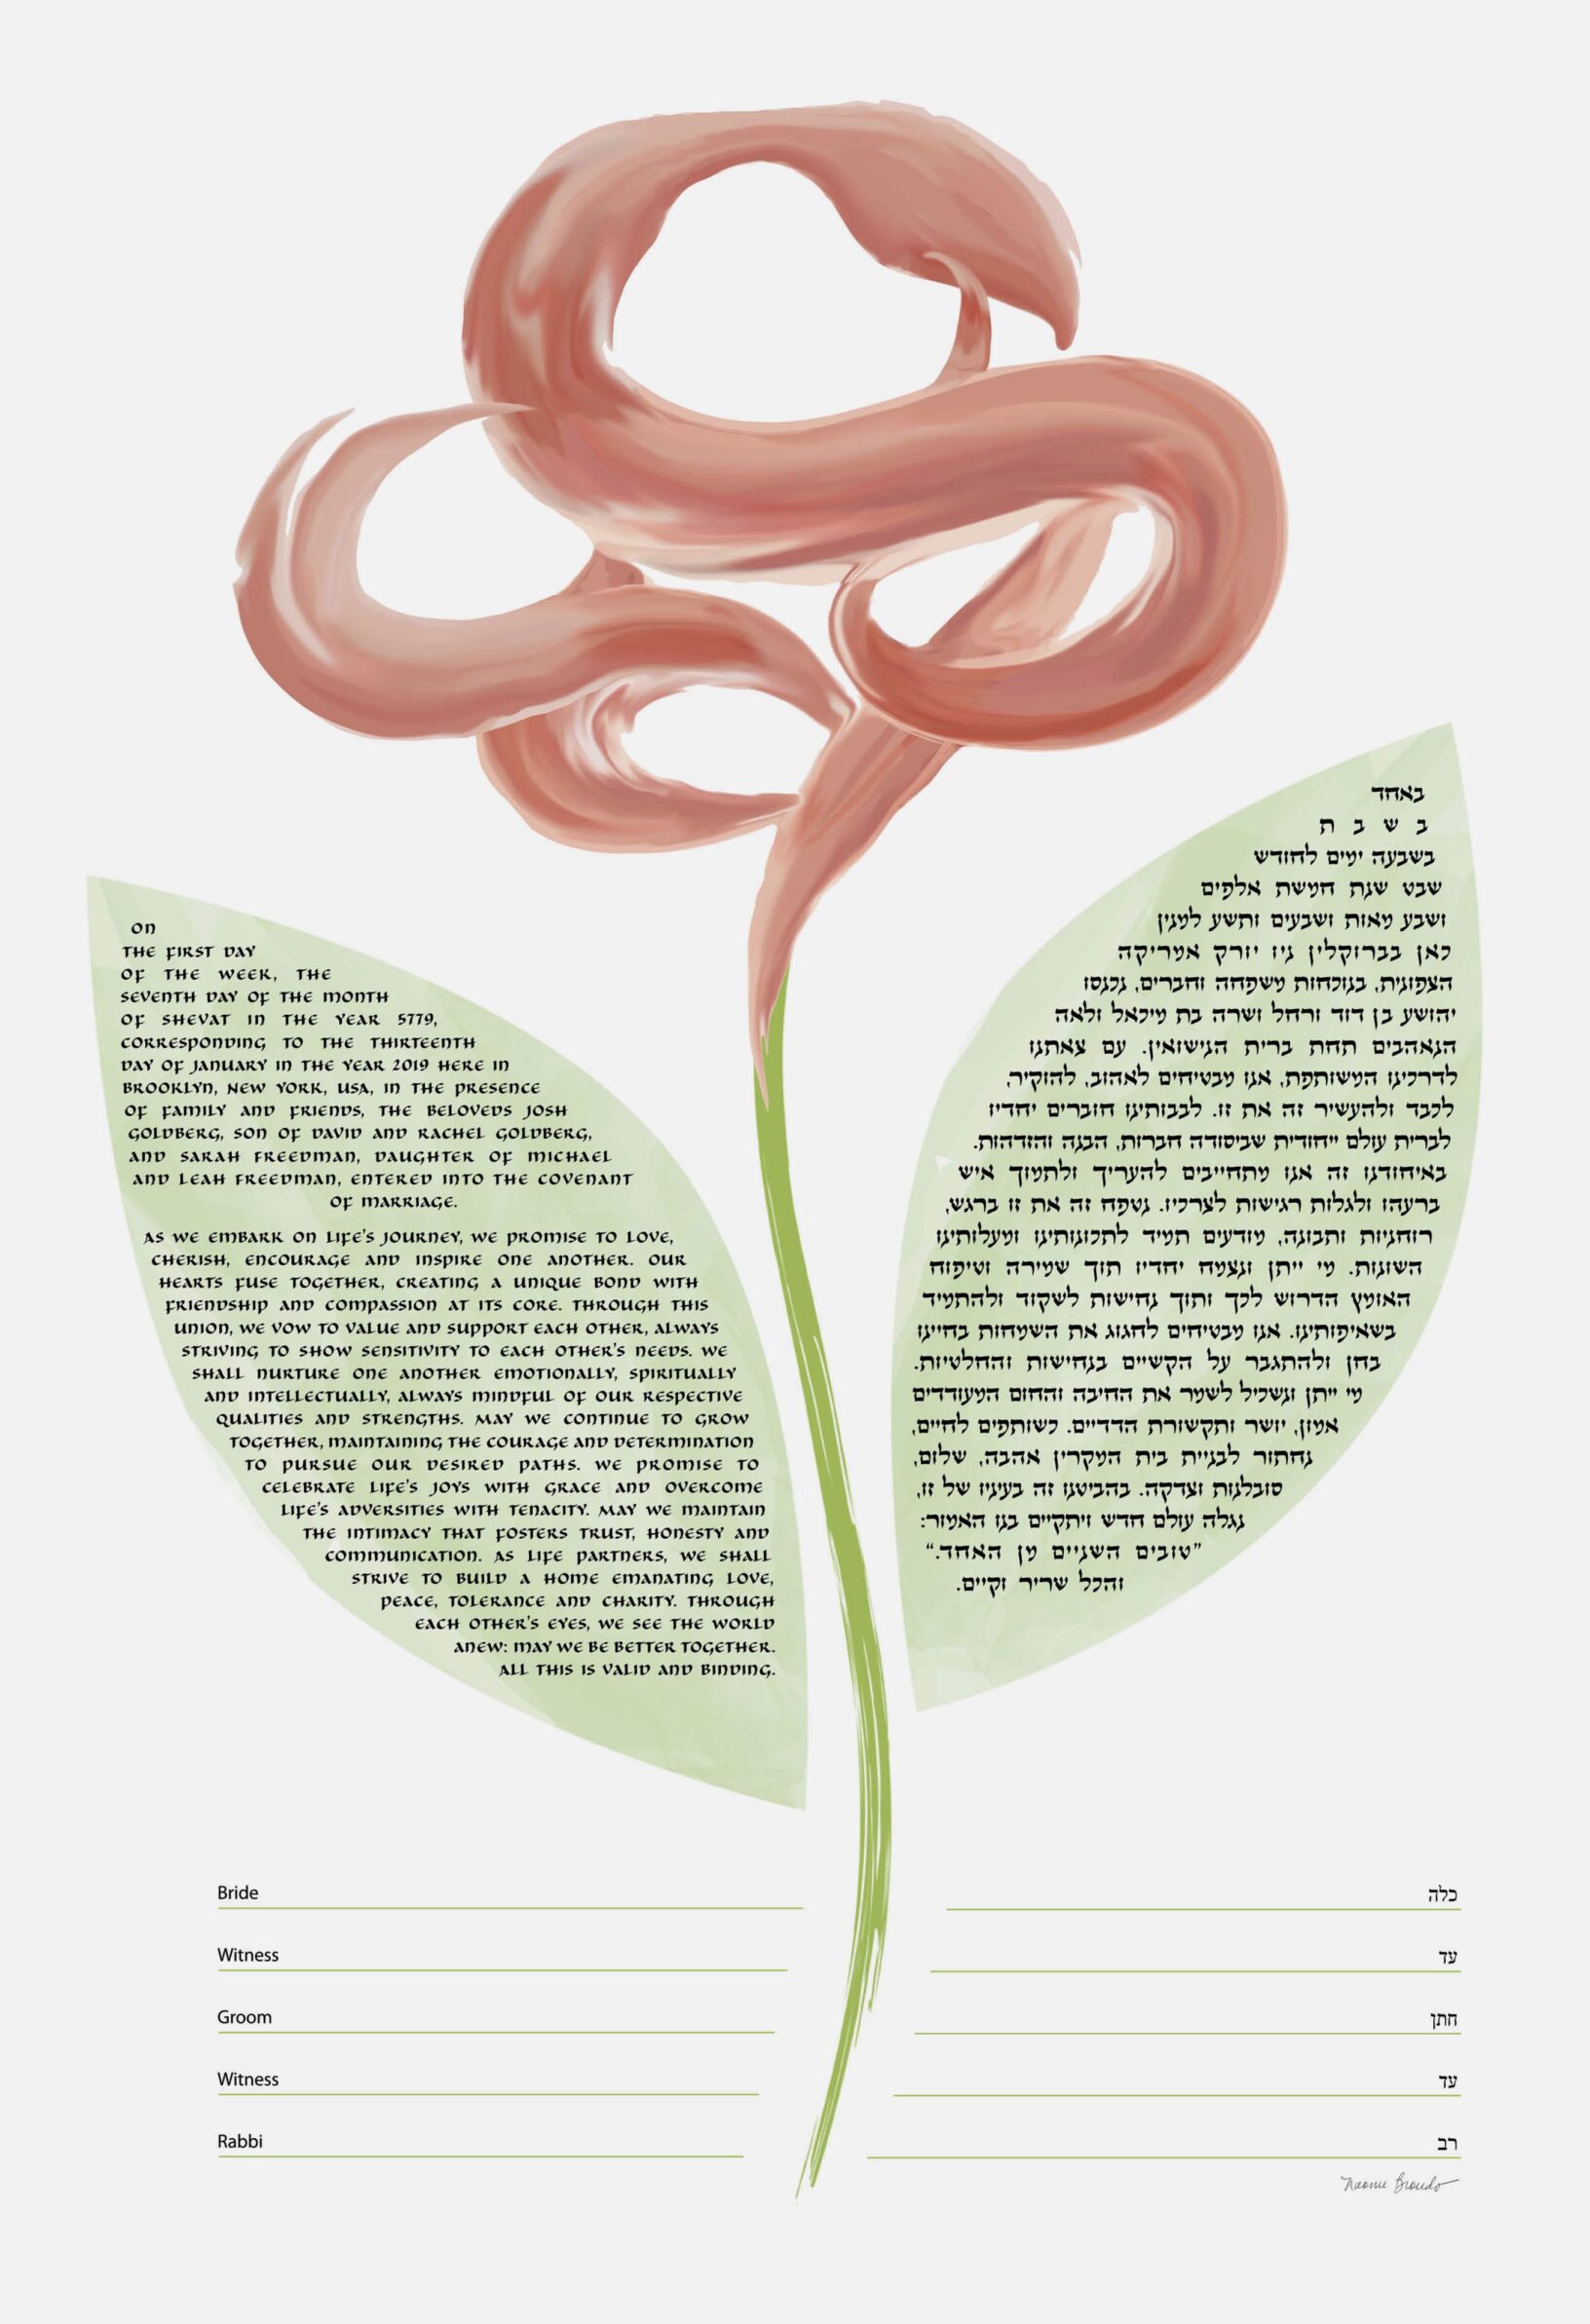 Naomi Broudo Giclee Rose II Pastel Ketubah Marriage Contracts